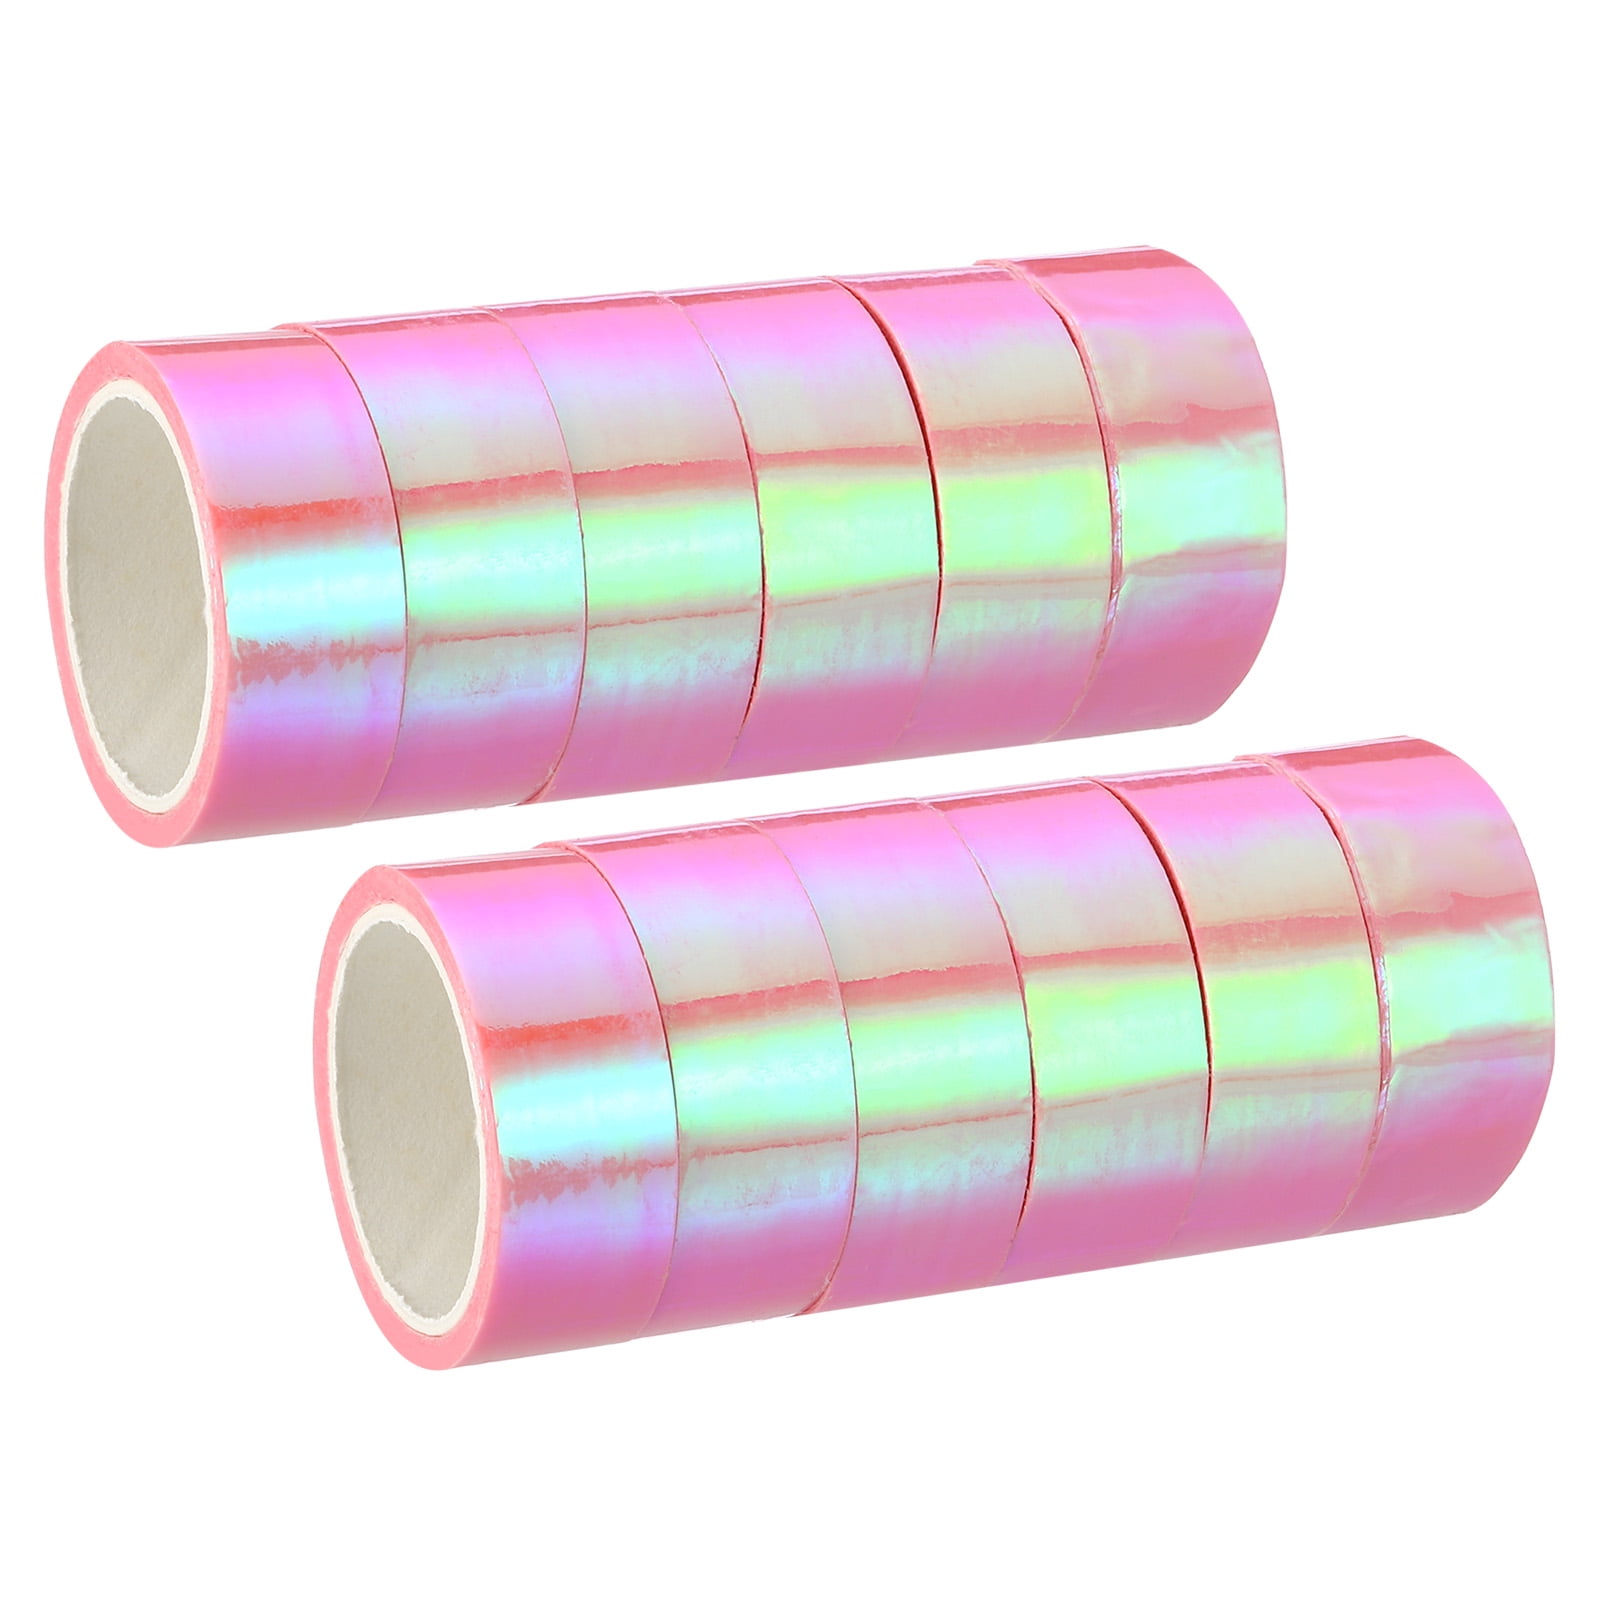 Uxcell 15mmx5m Holographic Tape Adhesive Metallic Foil Masking